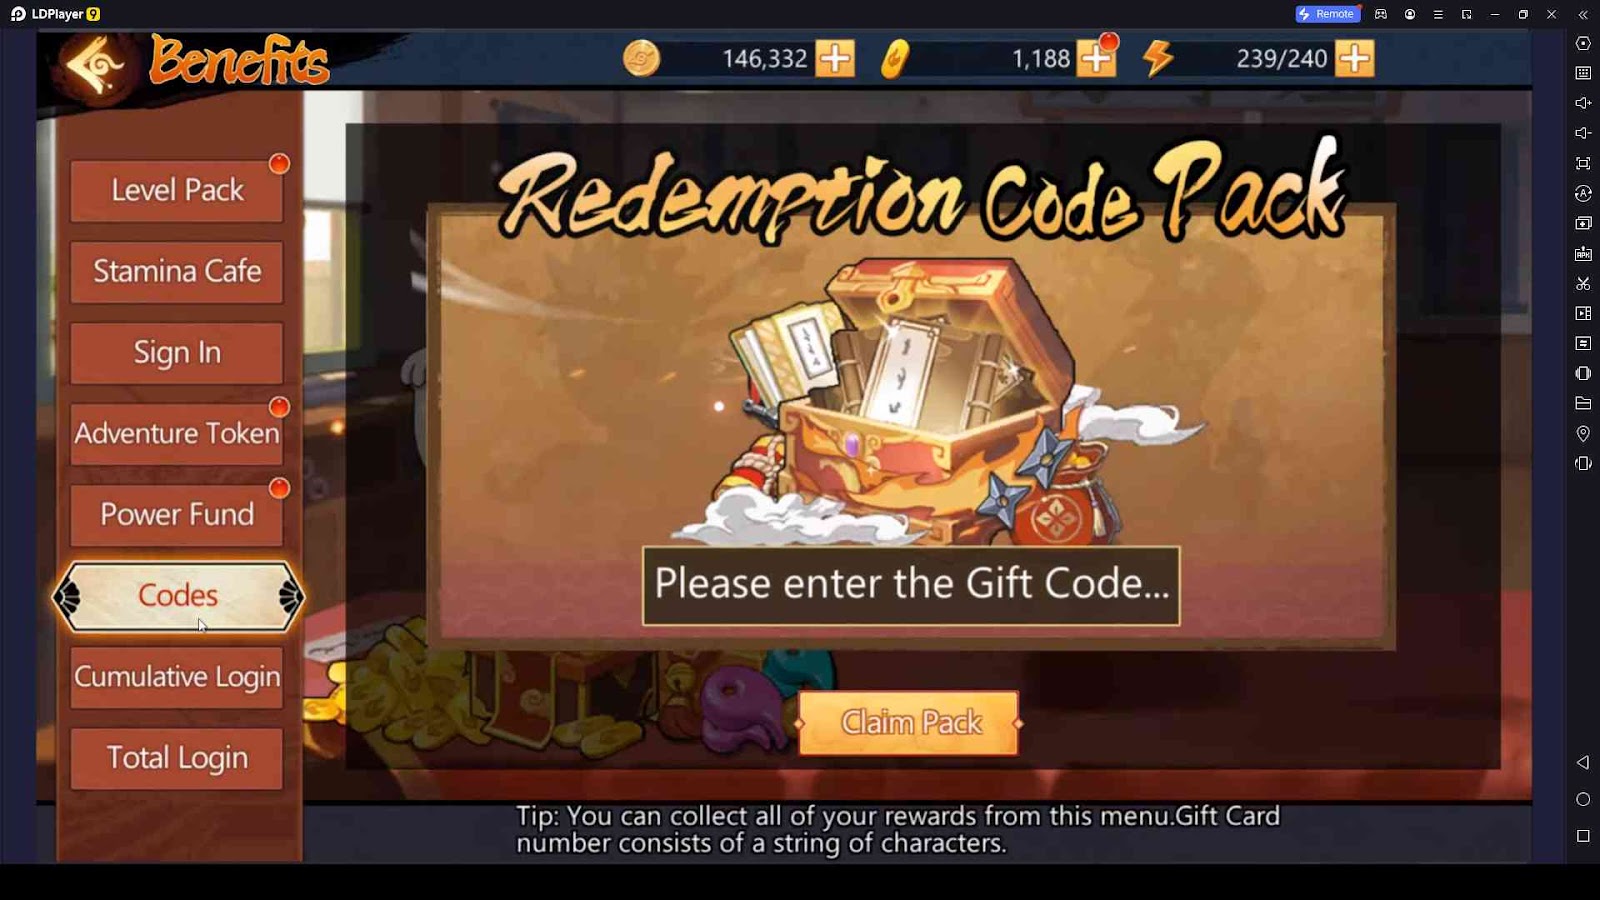 Redeeming Process for the Codes